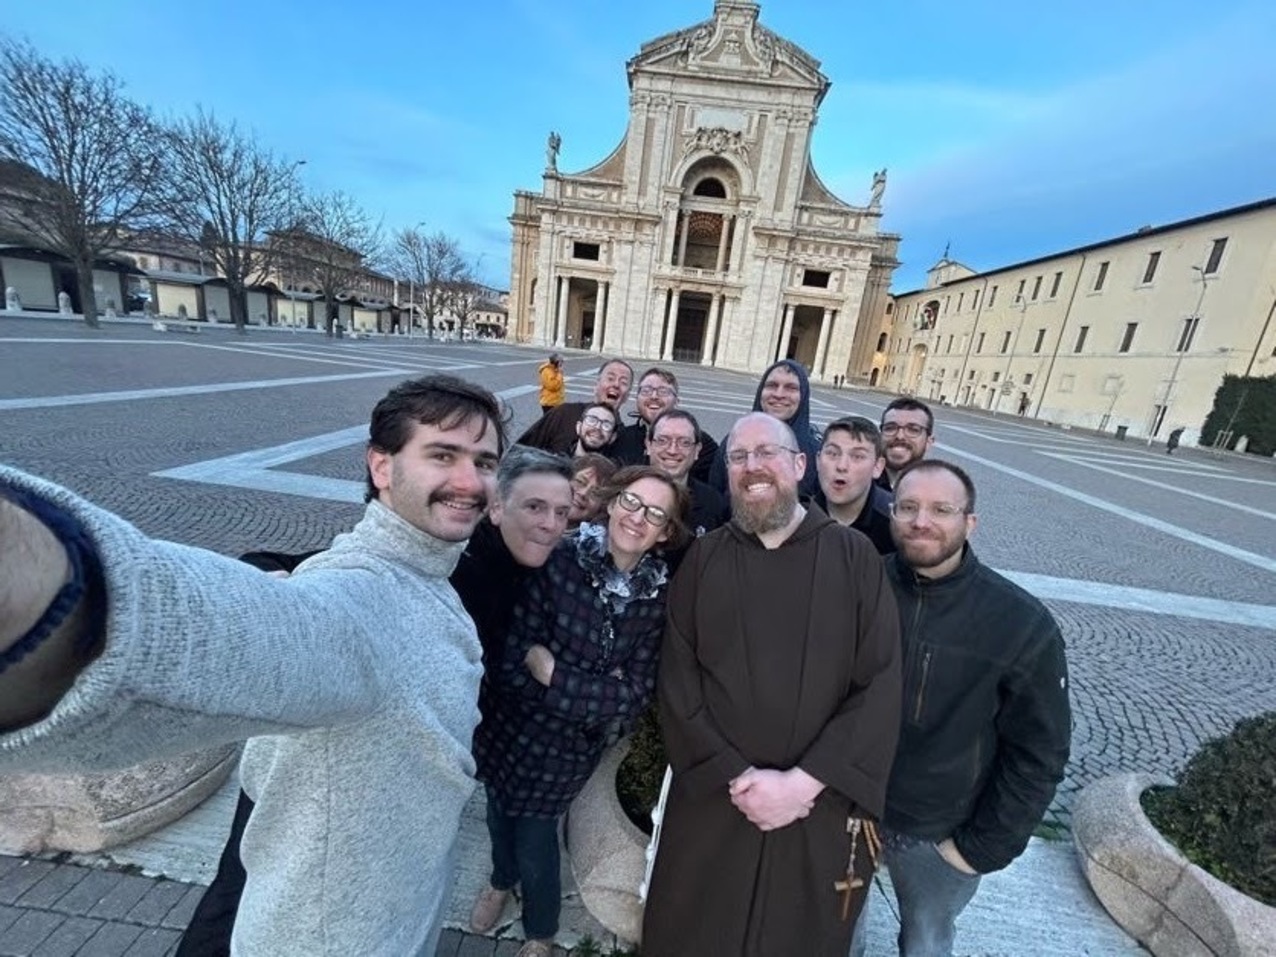 Day 7: Part of seminary group experiences Assisi